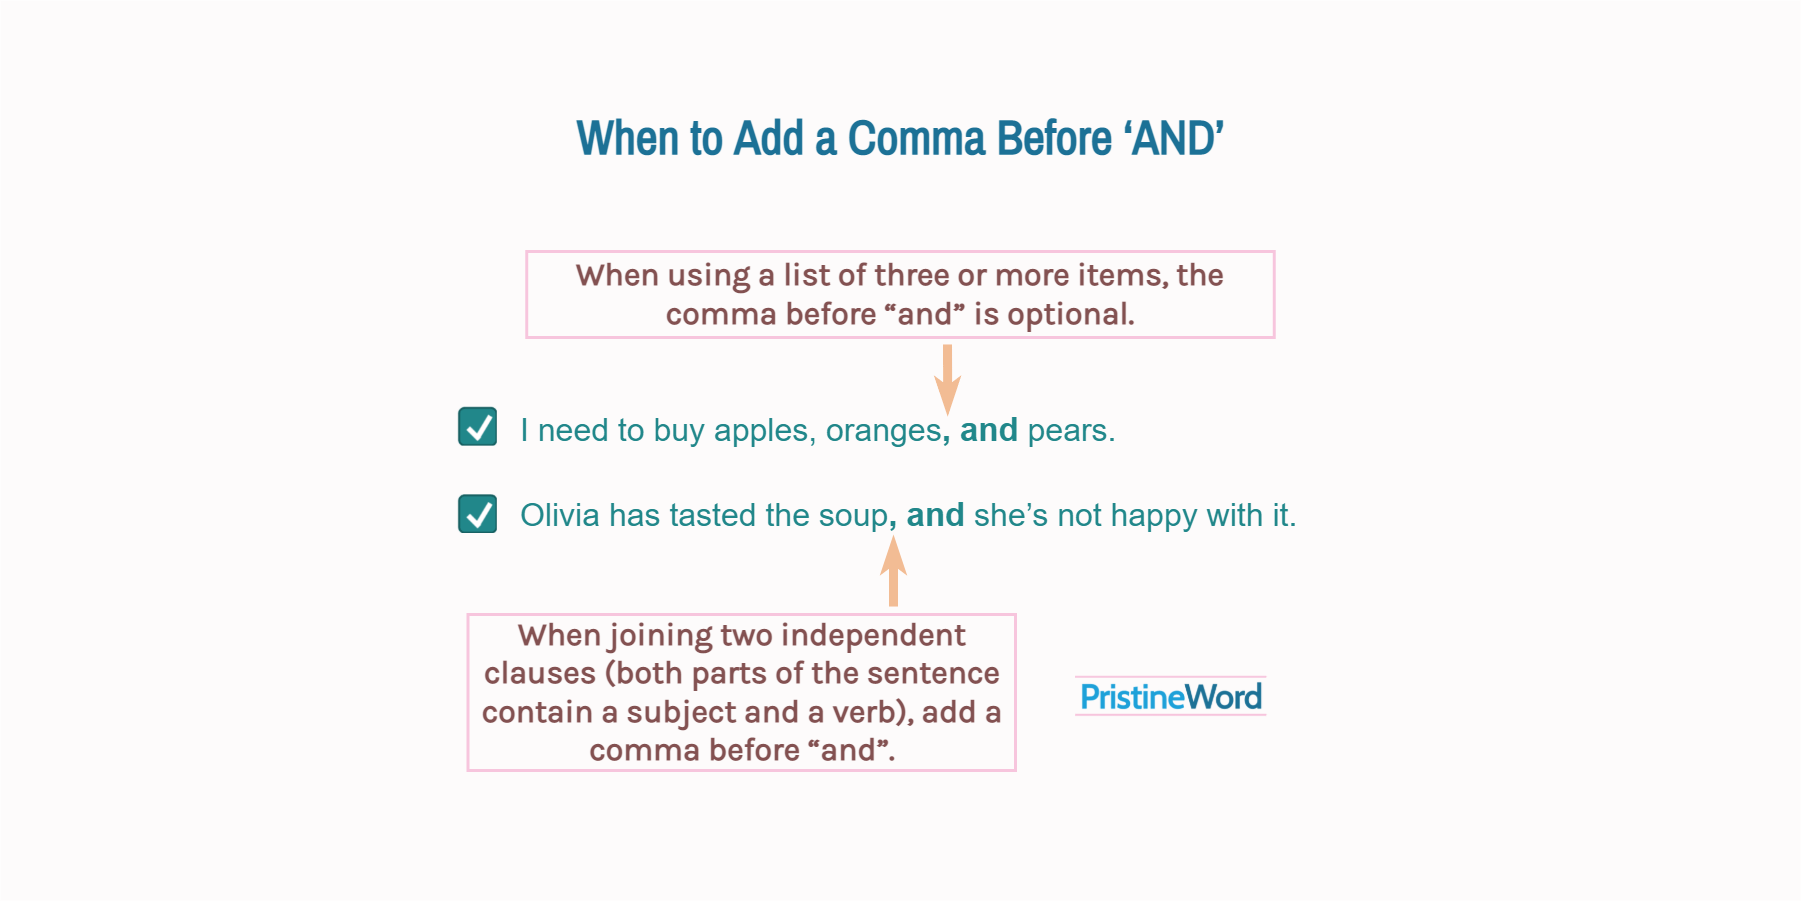 When to Add a Comma Before 'AND'